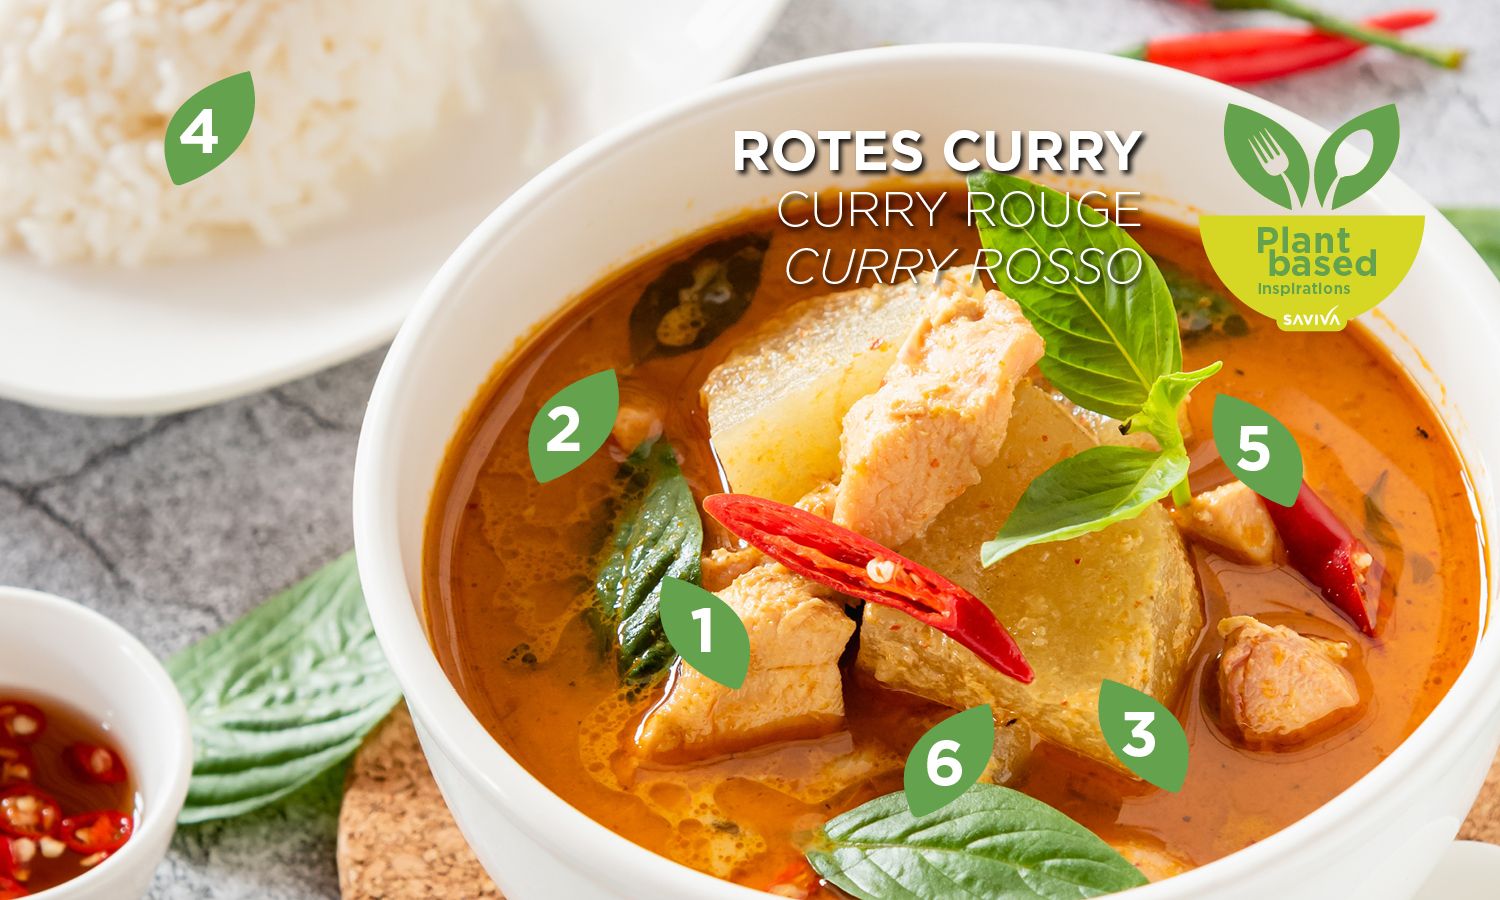 PLANT BASED INSPIRATIONS - ROTES CURRY